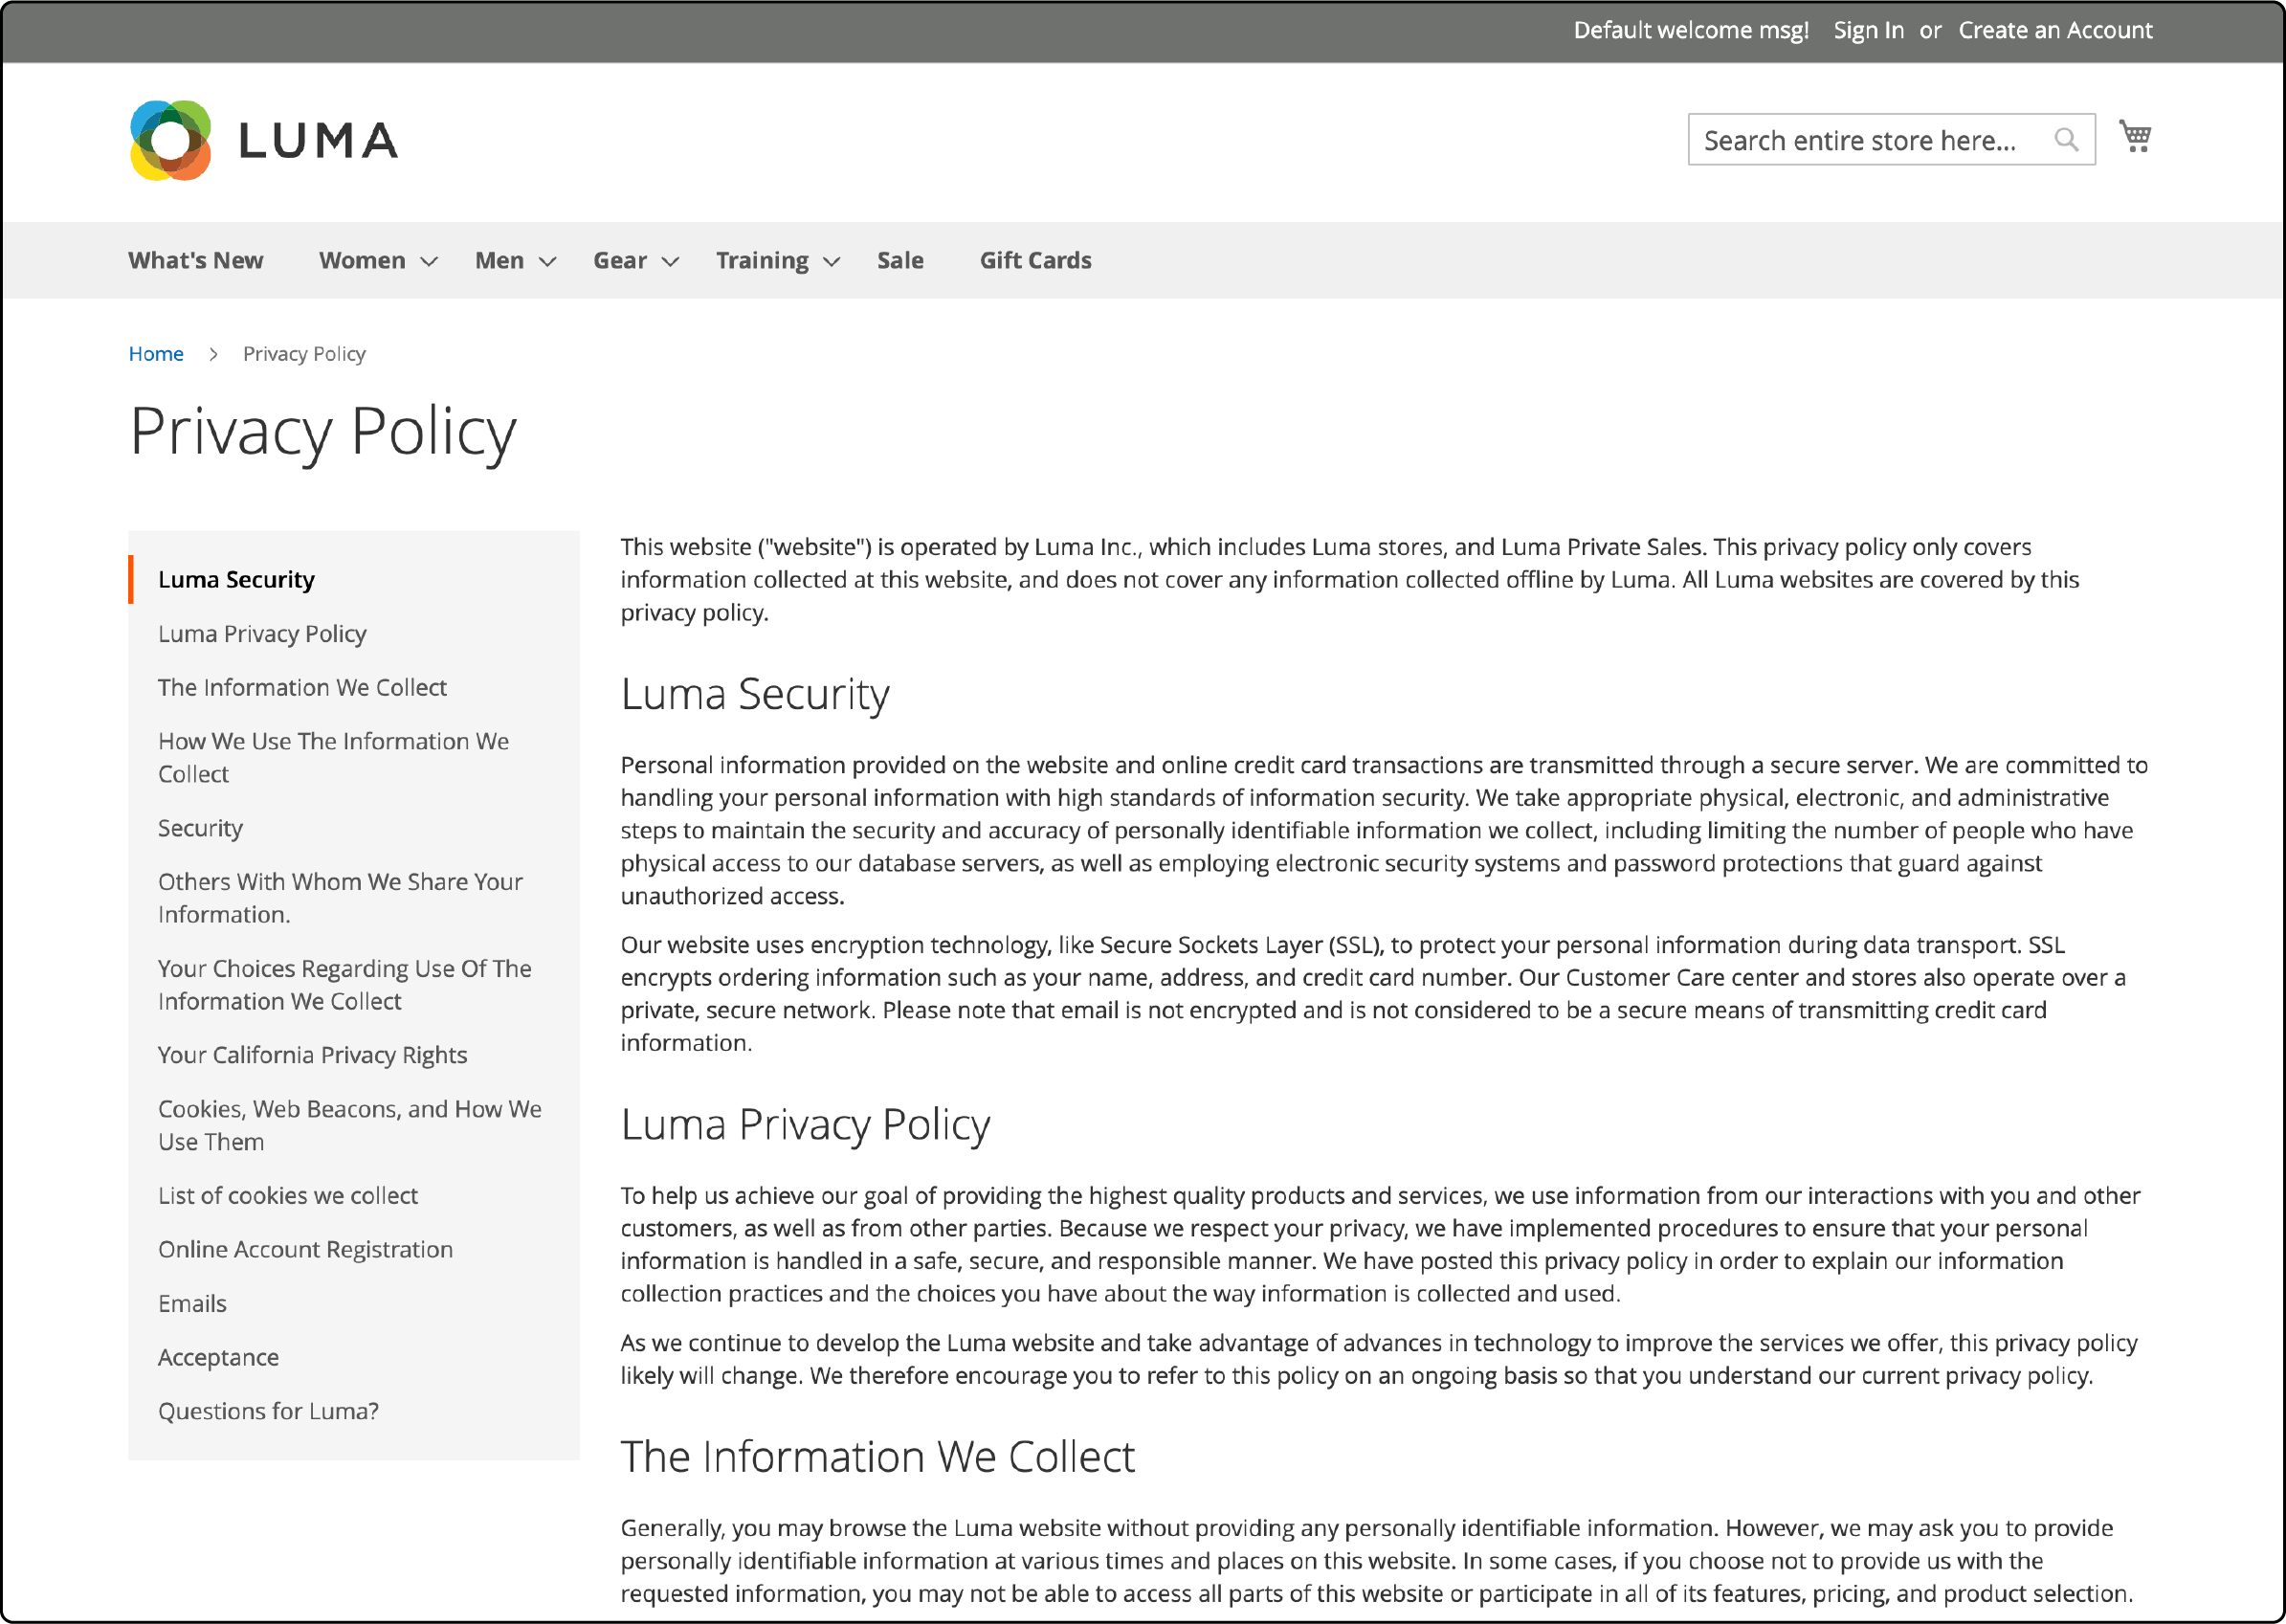 Display of updated privacy policy page in Magento 2